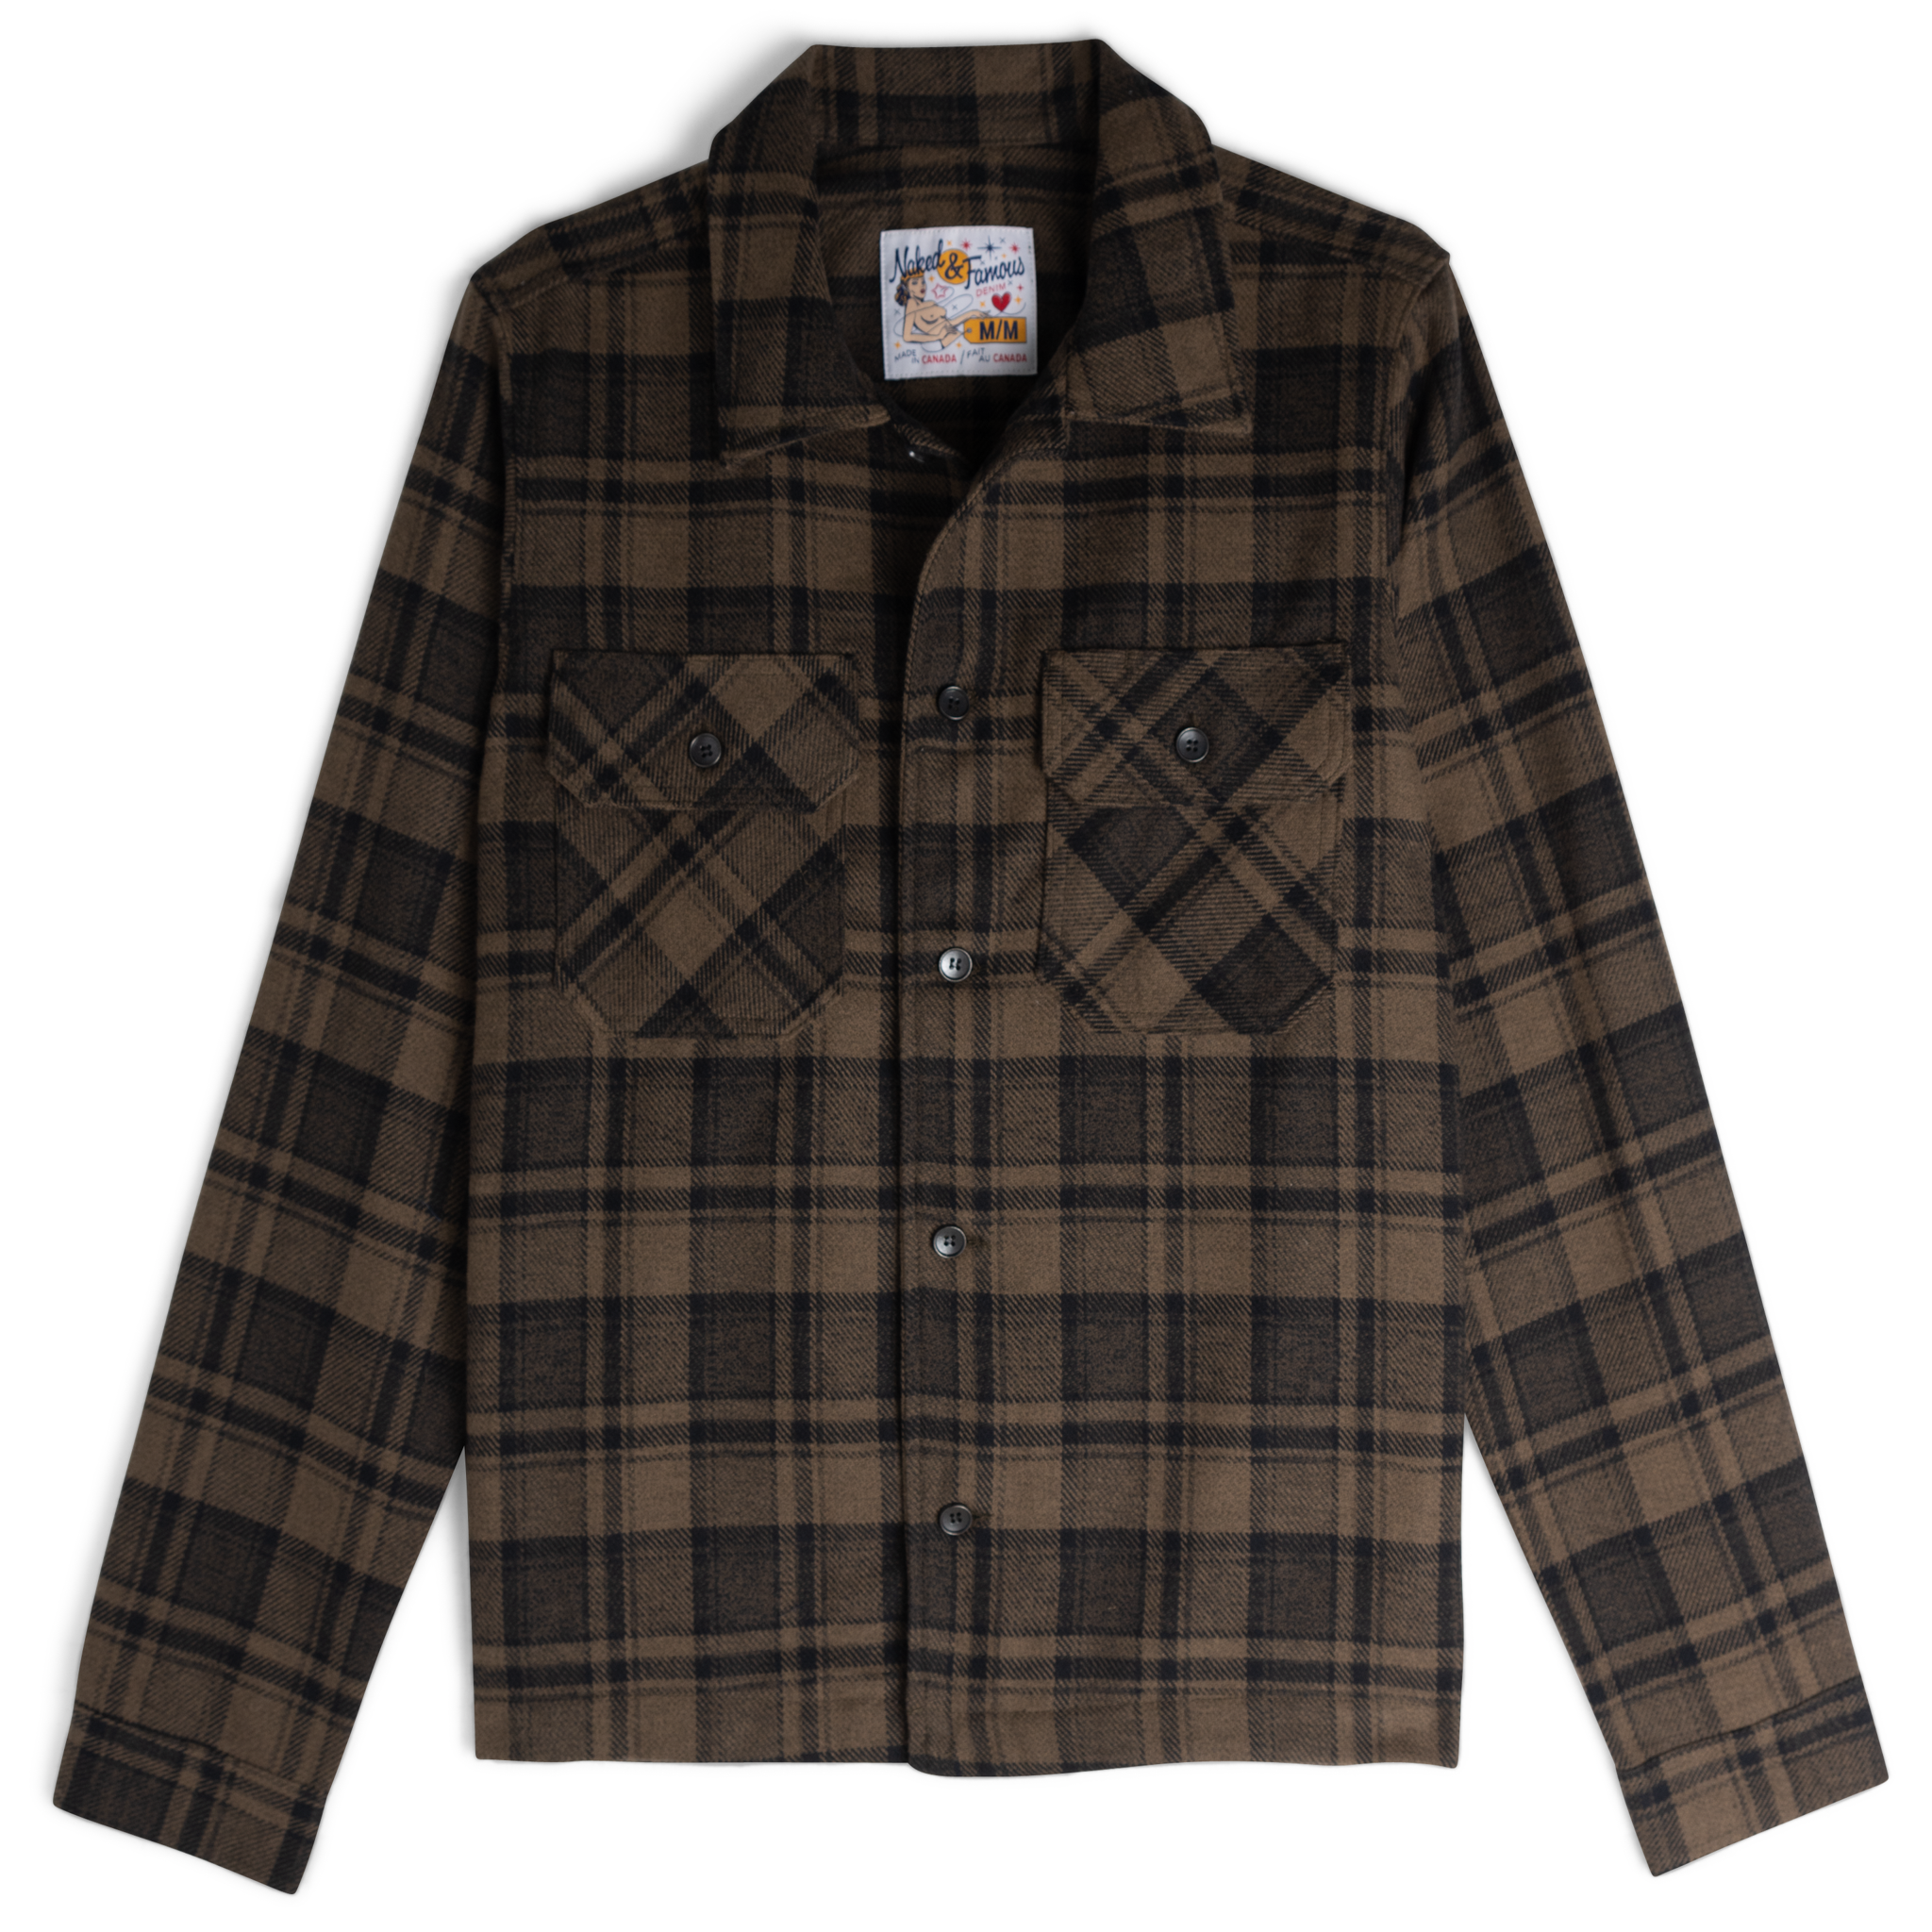  Work Shirt - Heavy Vintage Flannel - Earth - flat front 